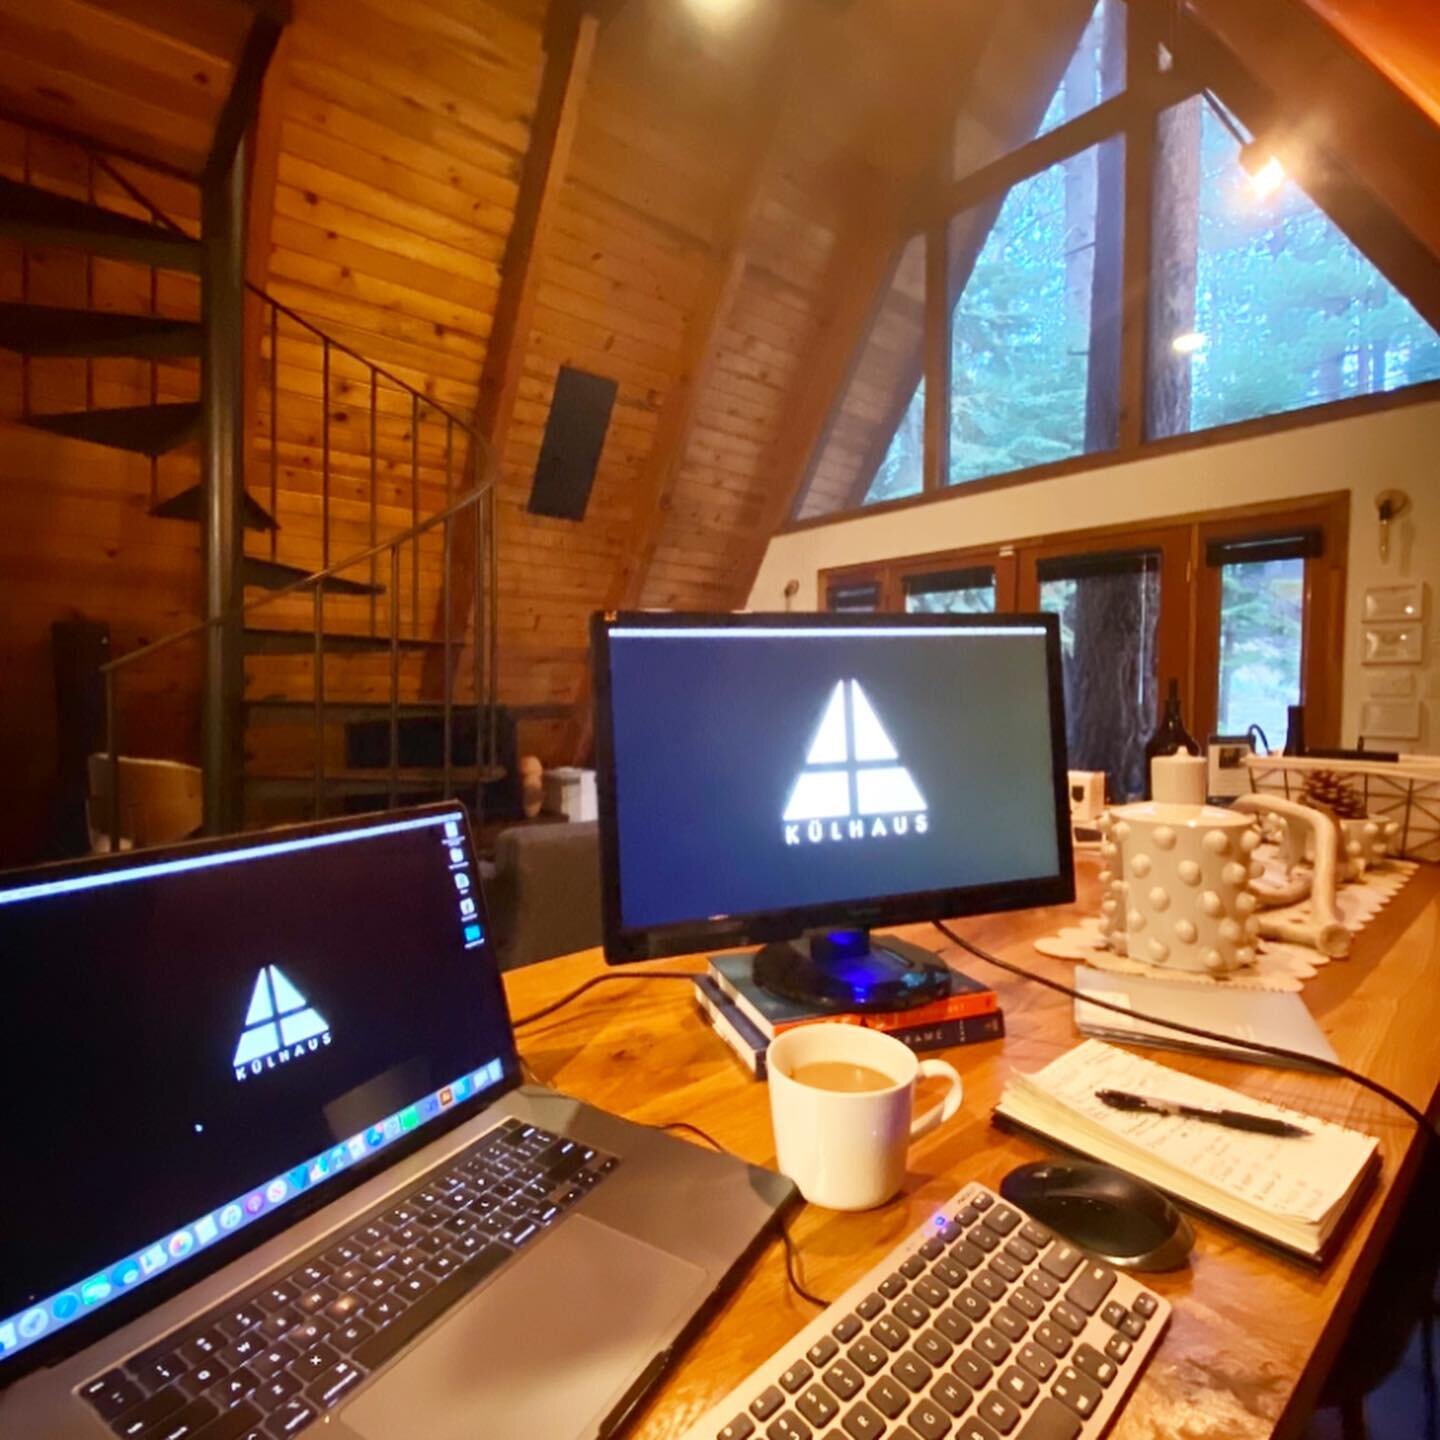 What&rsquo;s your WFH desk vibe?  In our tiny cabin, we actually have a few choices depending on your &ldquo;in-the-zone&rdquo;style:

1.  Matrix Style:  cram as many laptops and monitors on the 11 ft dining table to create your own Command Central ?